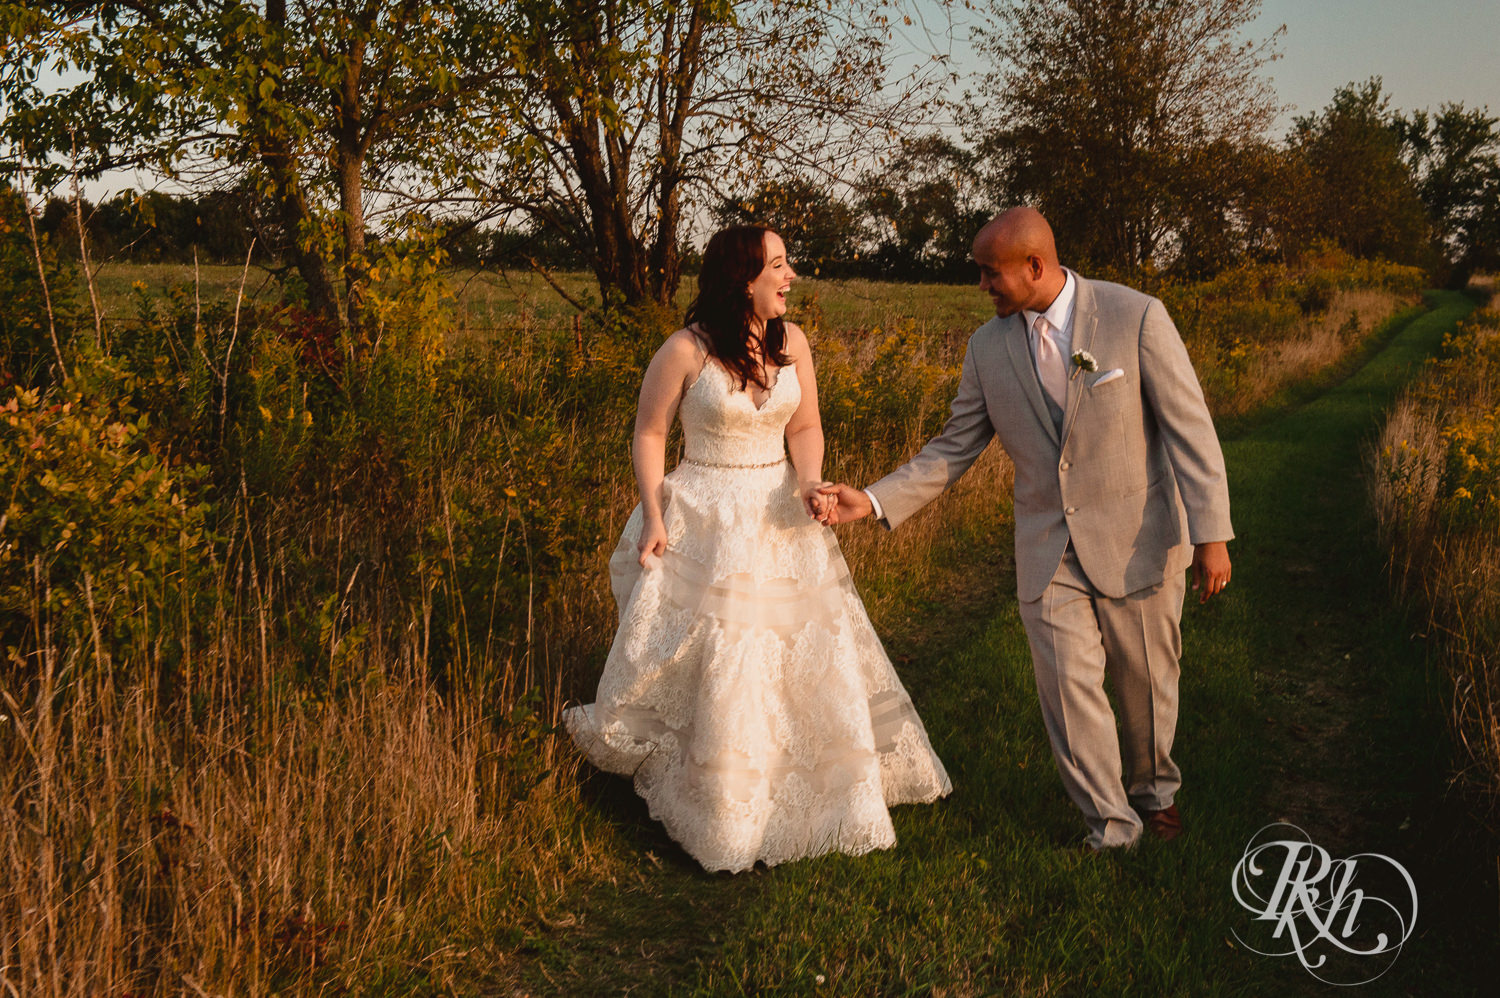 Bride and Asian groom laugh during sunset in field on a hill at Birch Hill Barn in Glenwood City, Wisconsin.